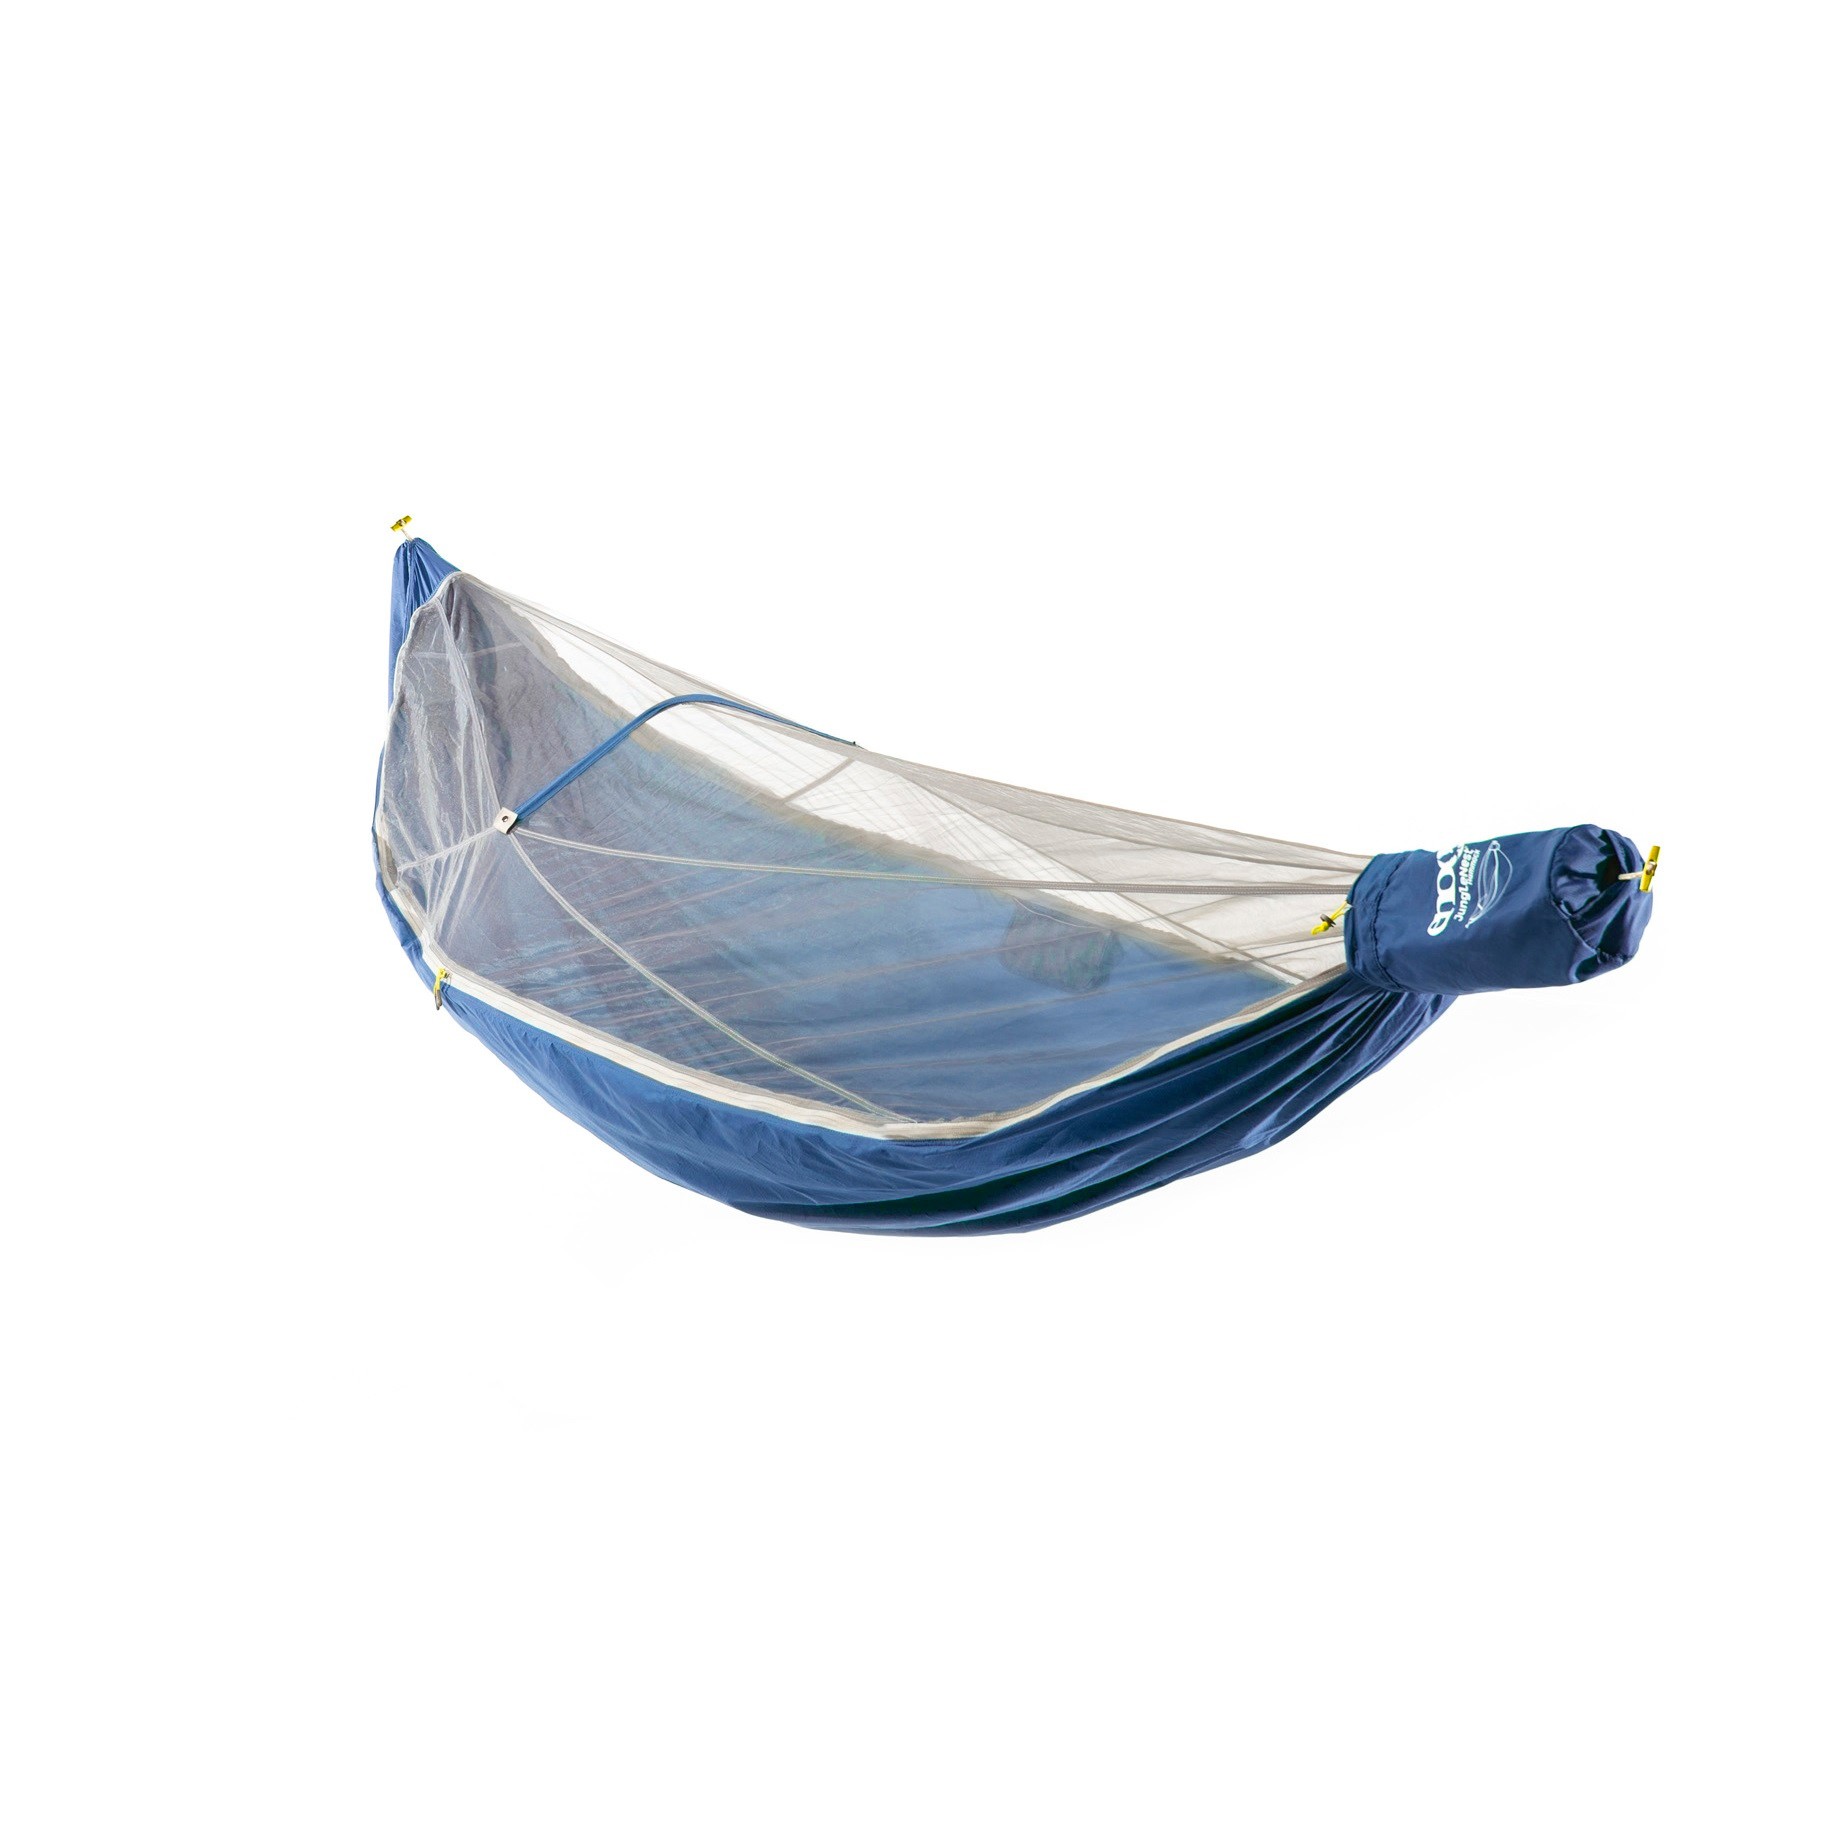 Eagle Nest Outfitters JungleNest Hammock Pacific